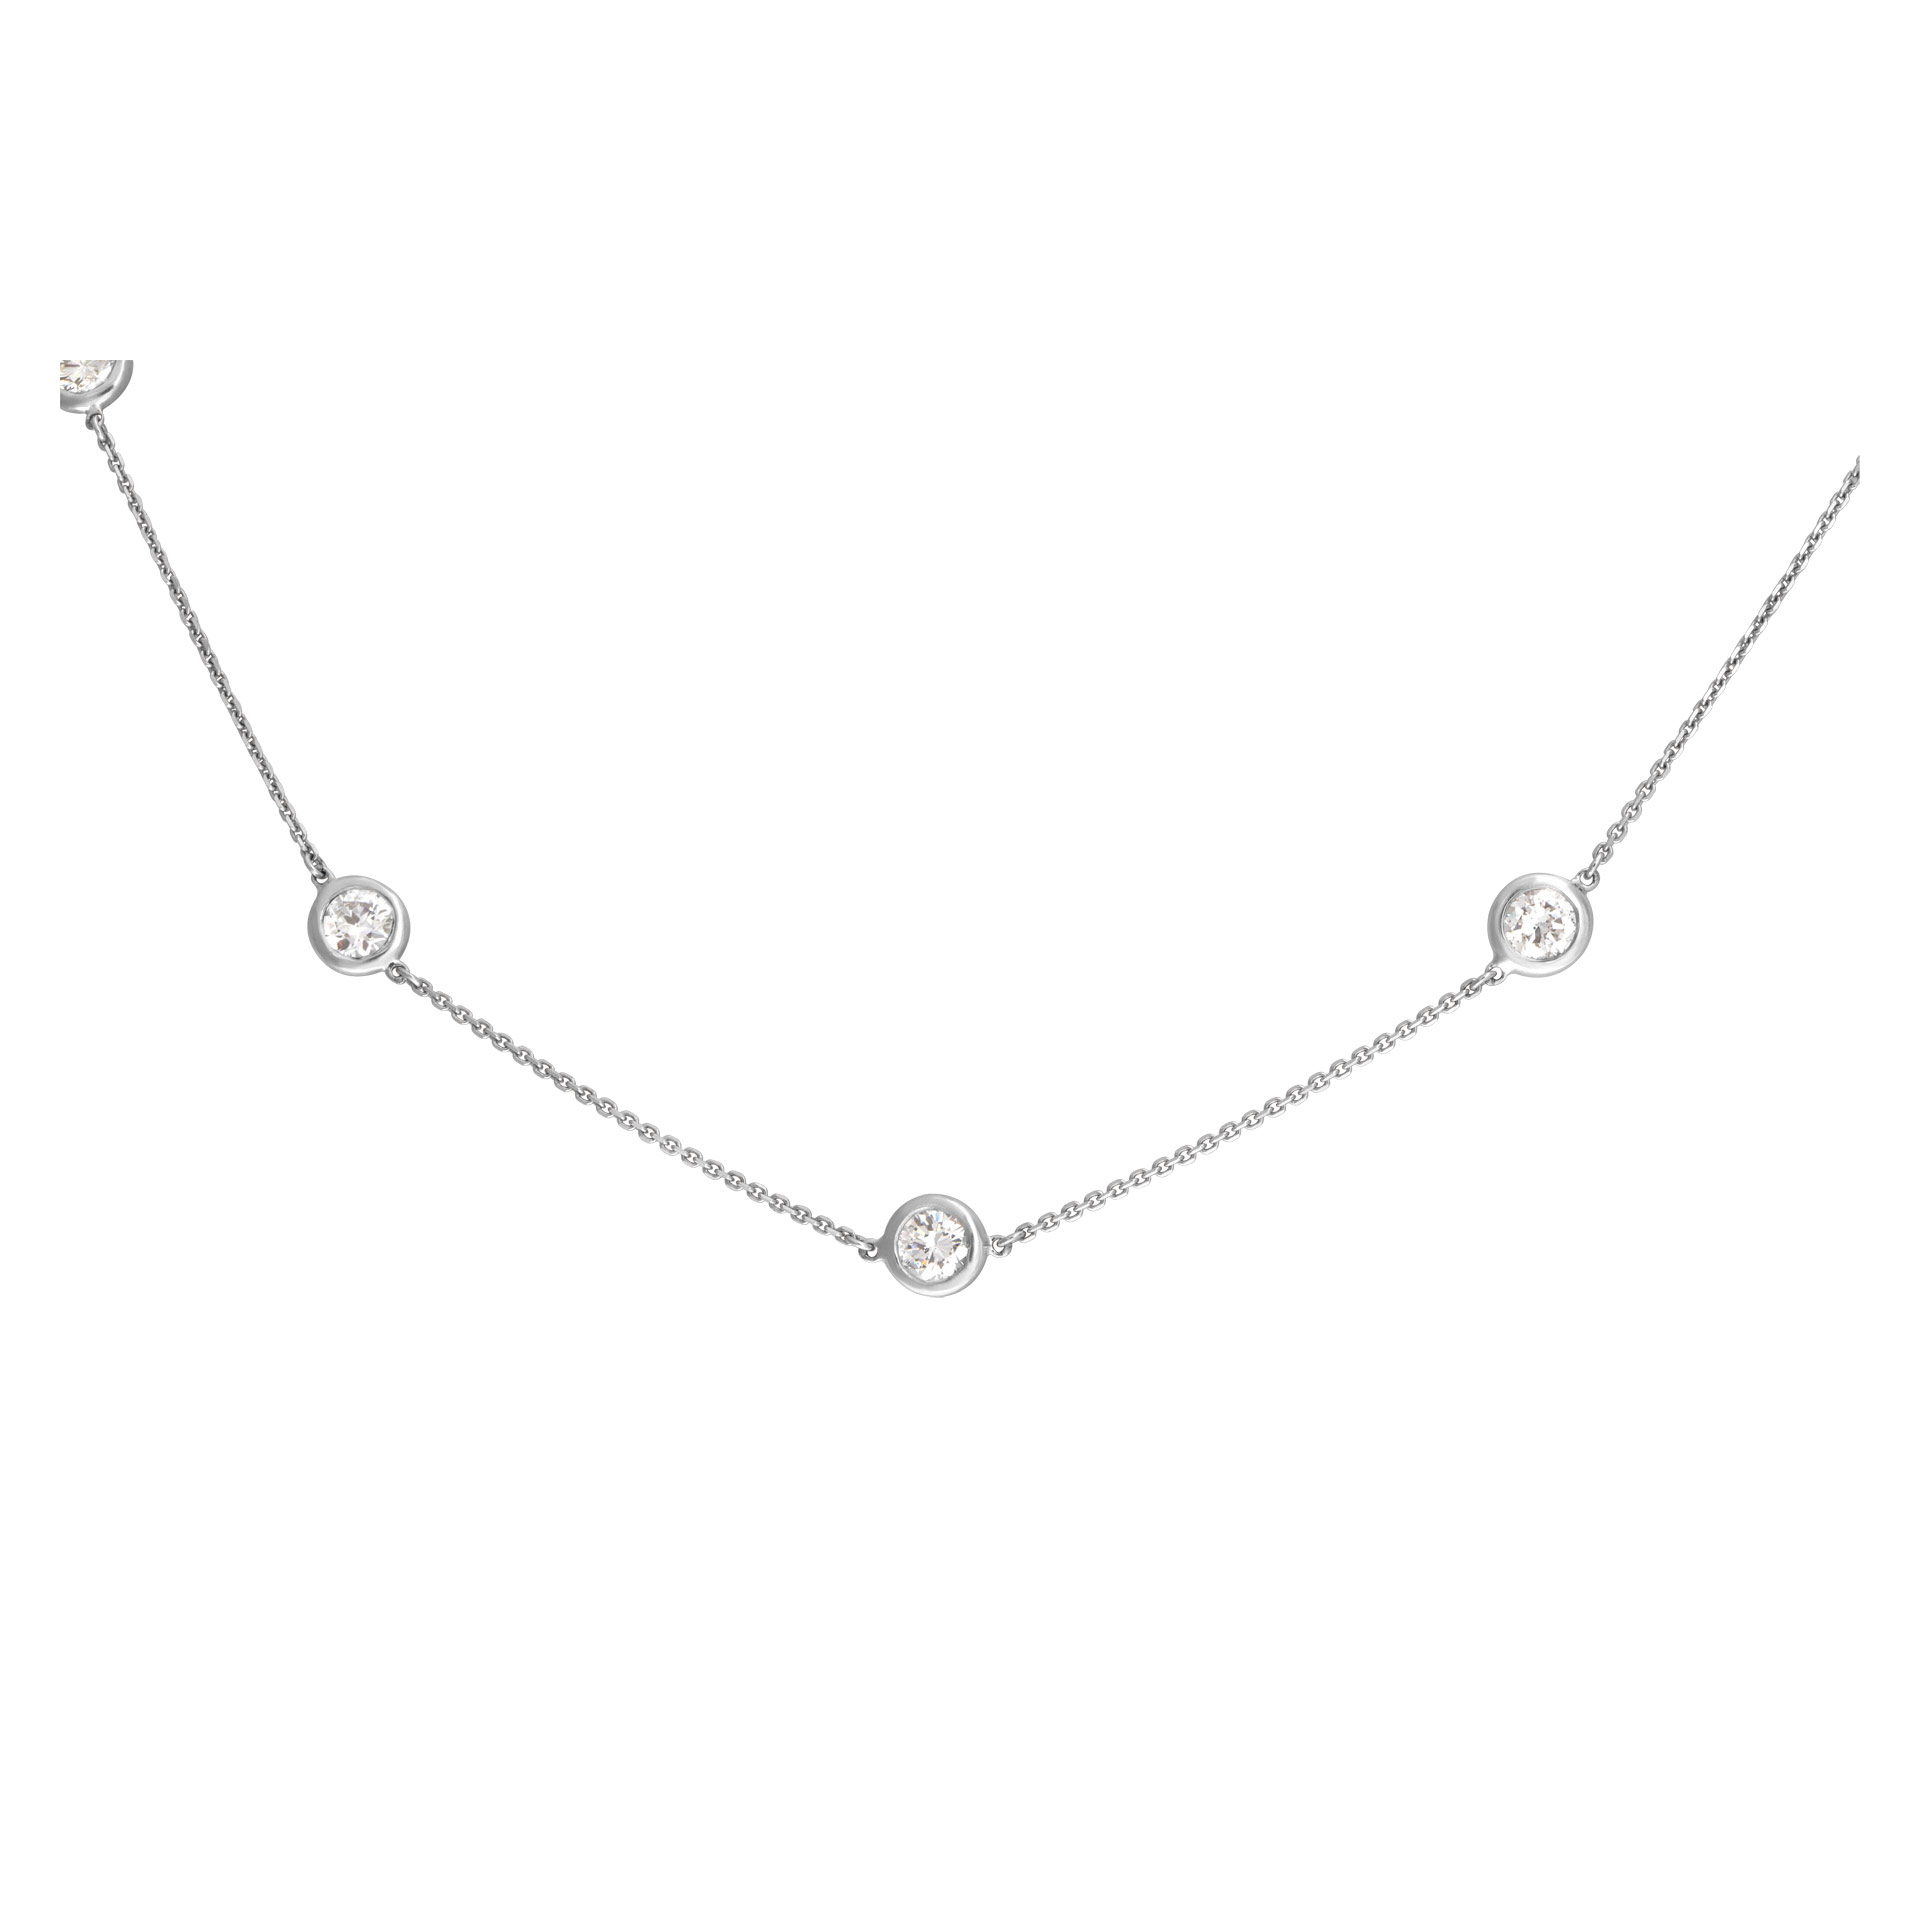 "Diamonds by the Yard" necklace, the 14k white gold. 4.5 carats image 1